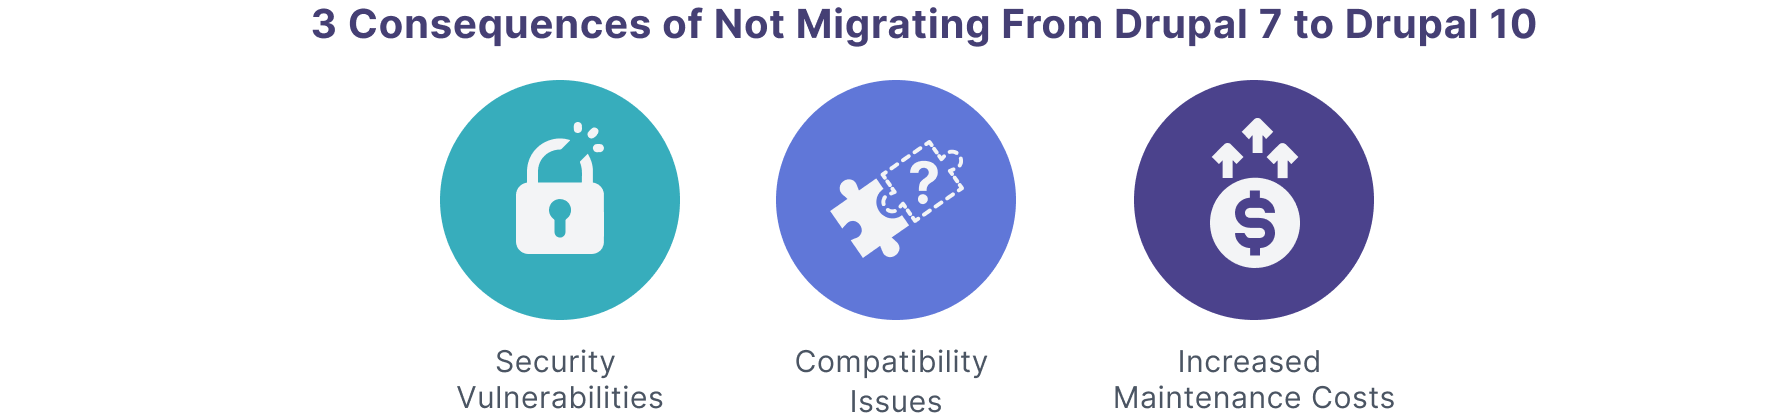 3-consequences-of-not-migrating-drupal-7-to-drupal-10